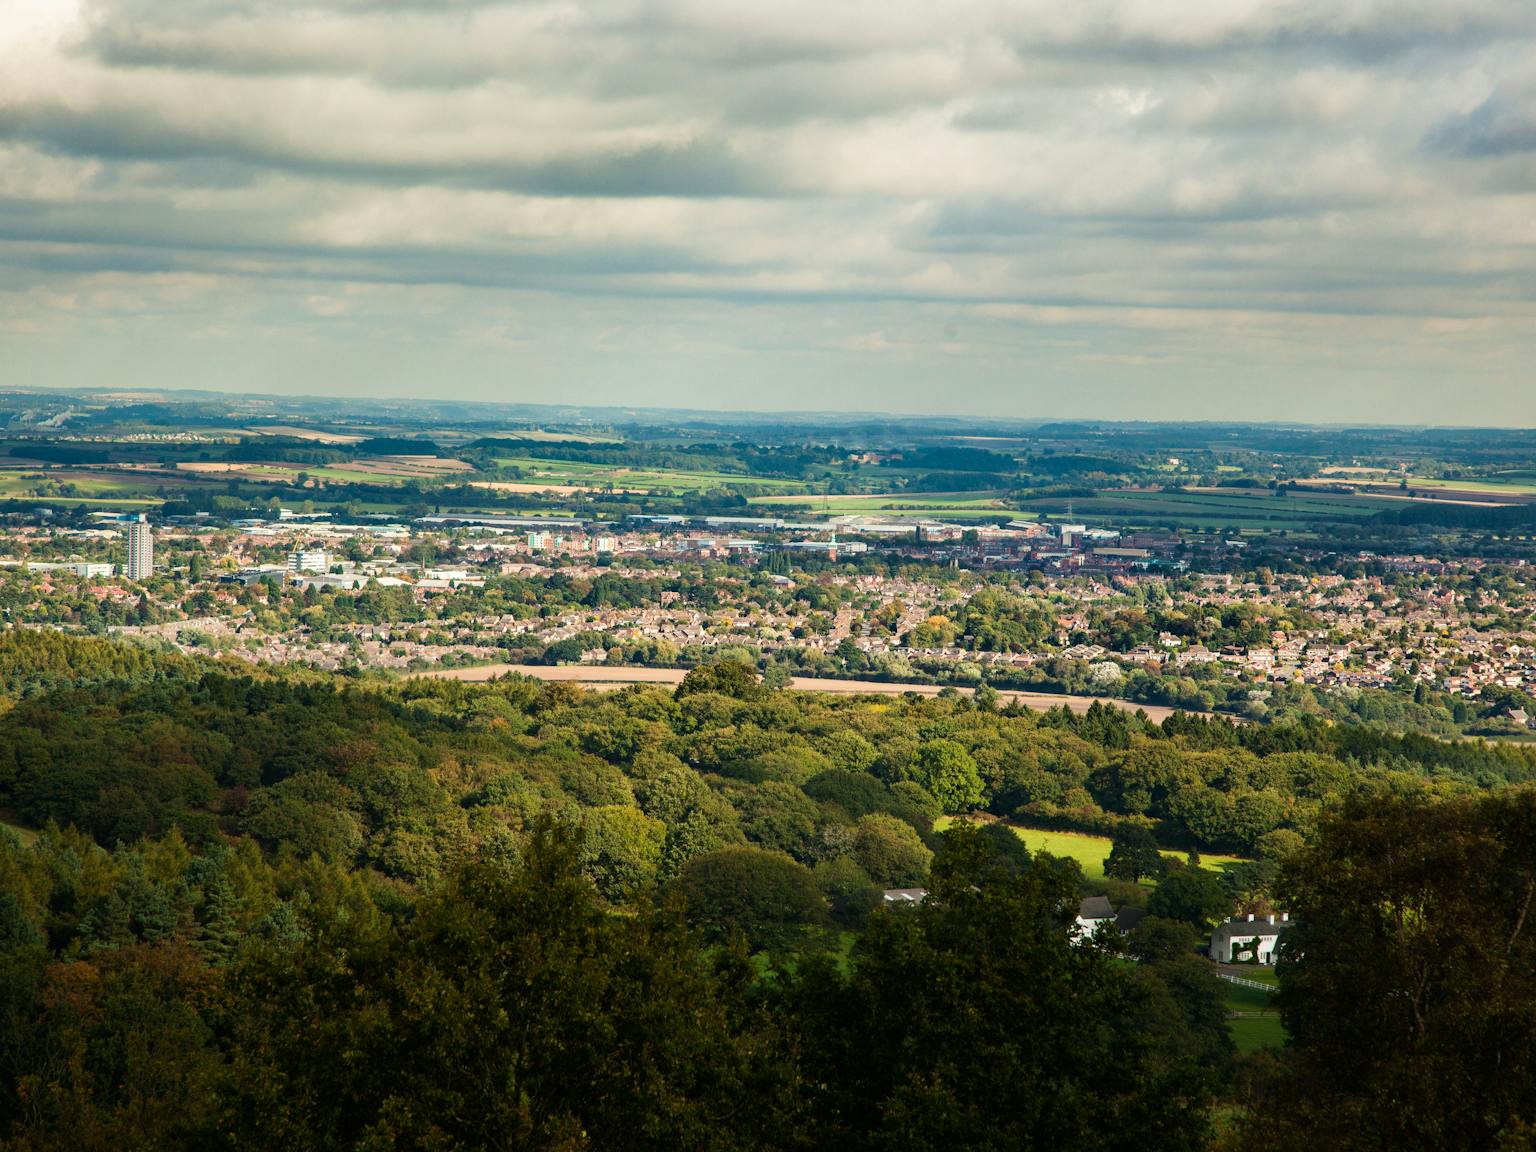 View over Loughborough